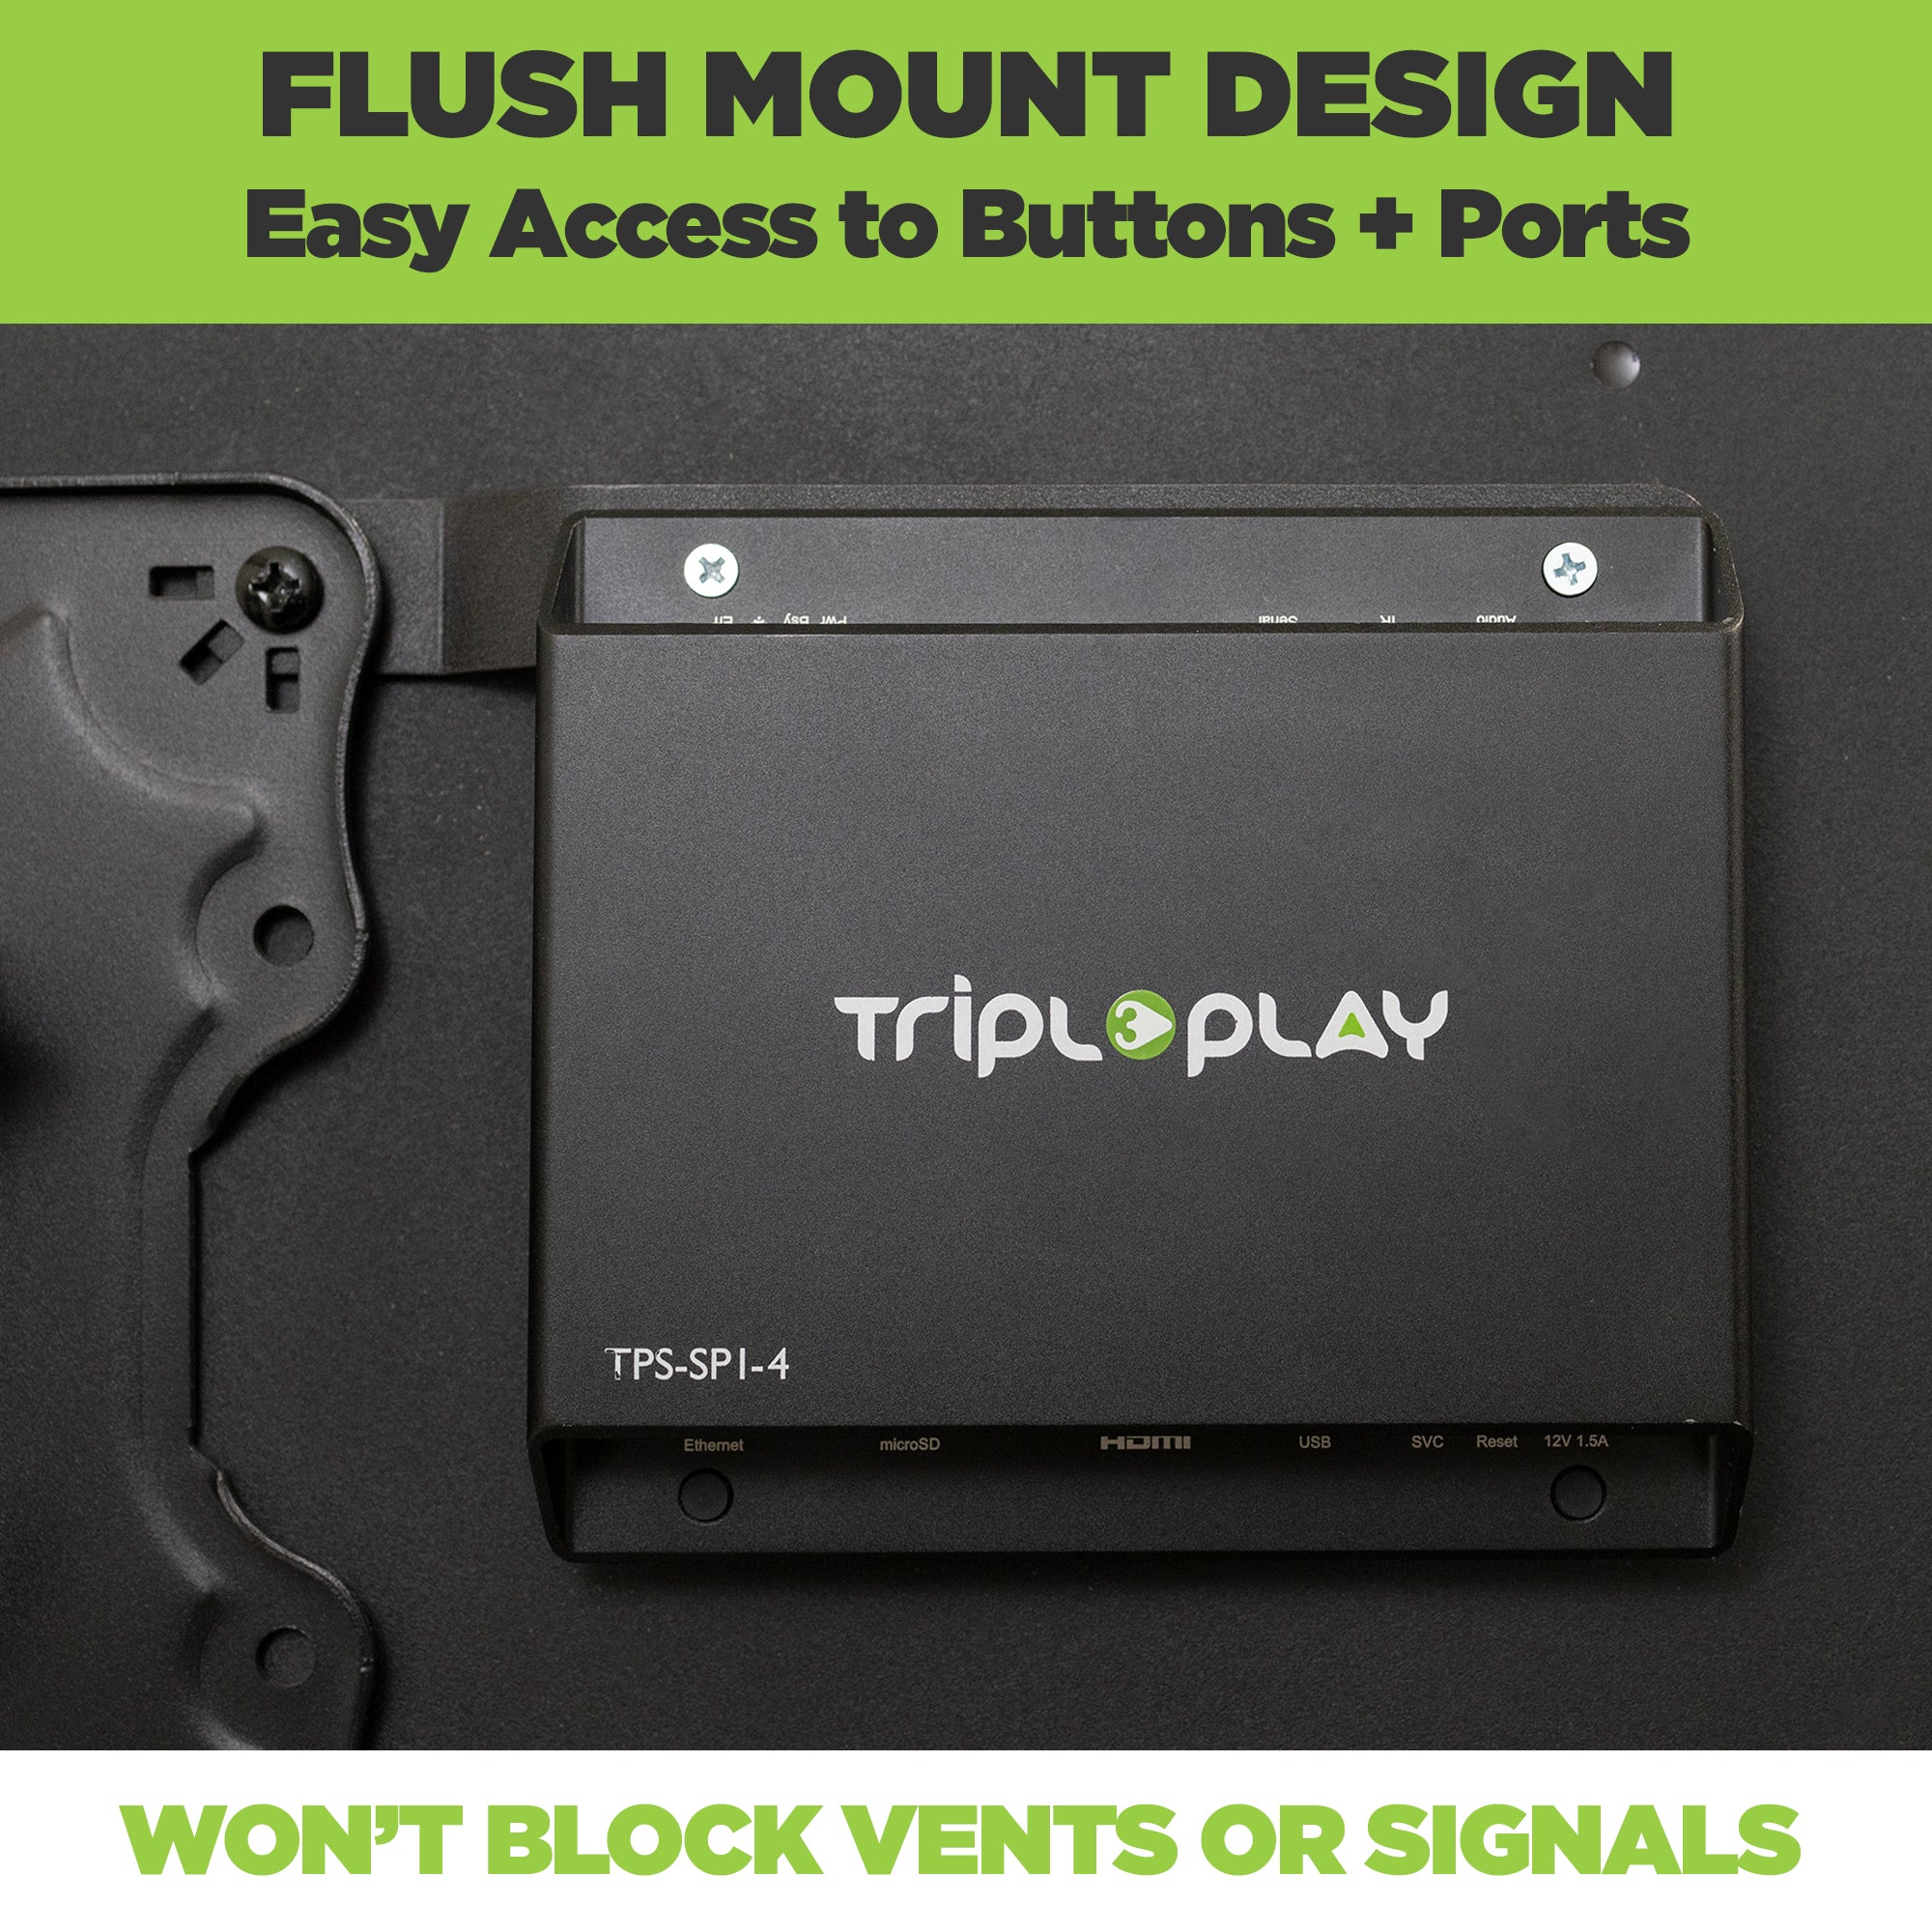 Attach Tripleplay media player to back of TV using the HIDEit 3Play VESA Mount Bar.